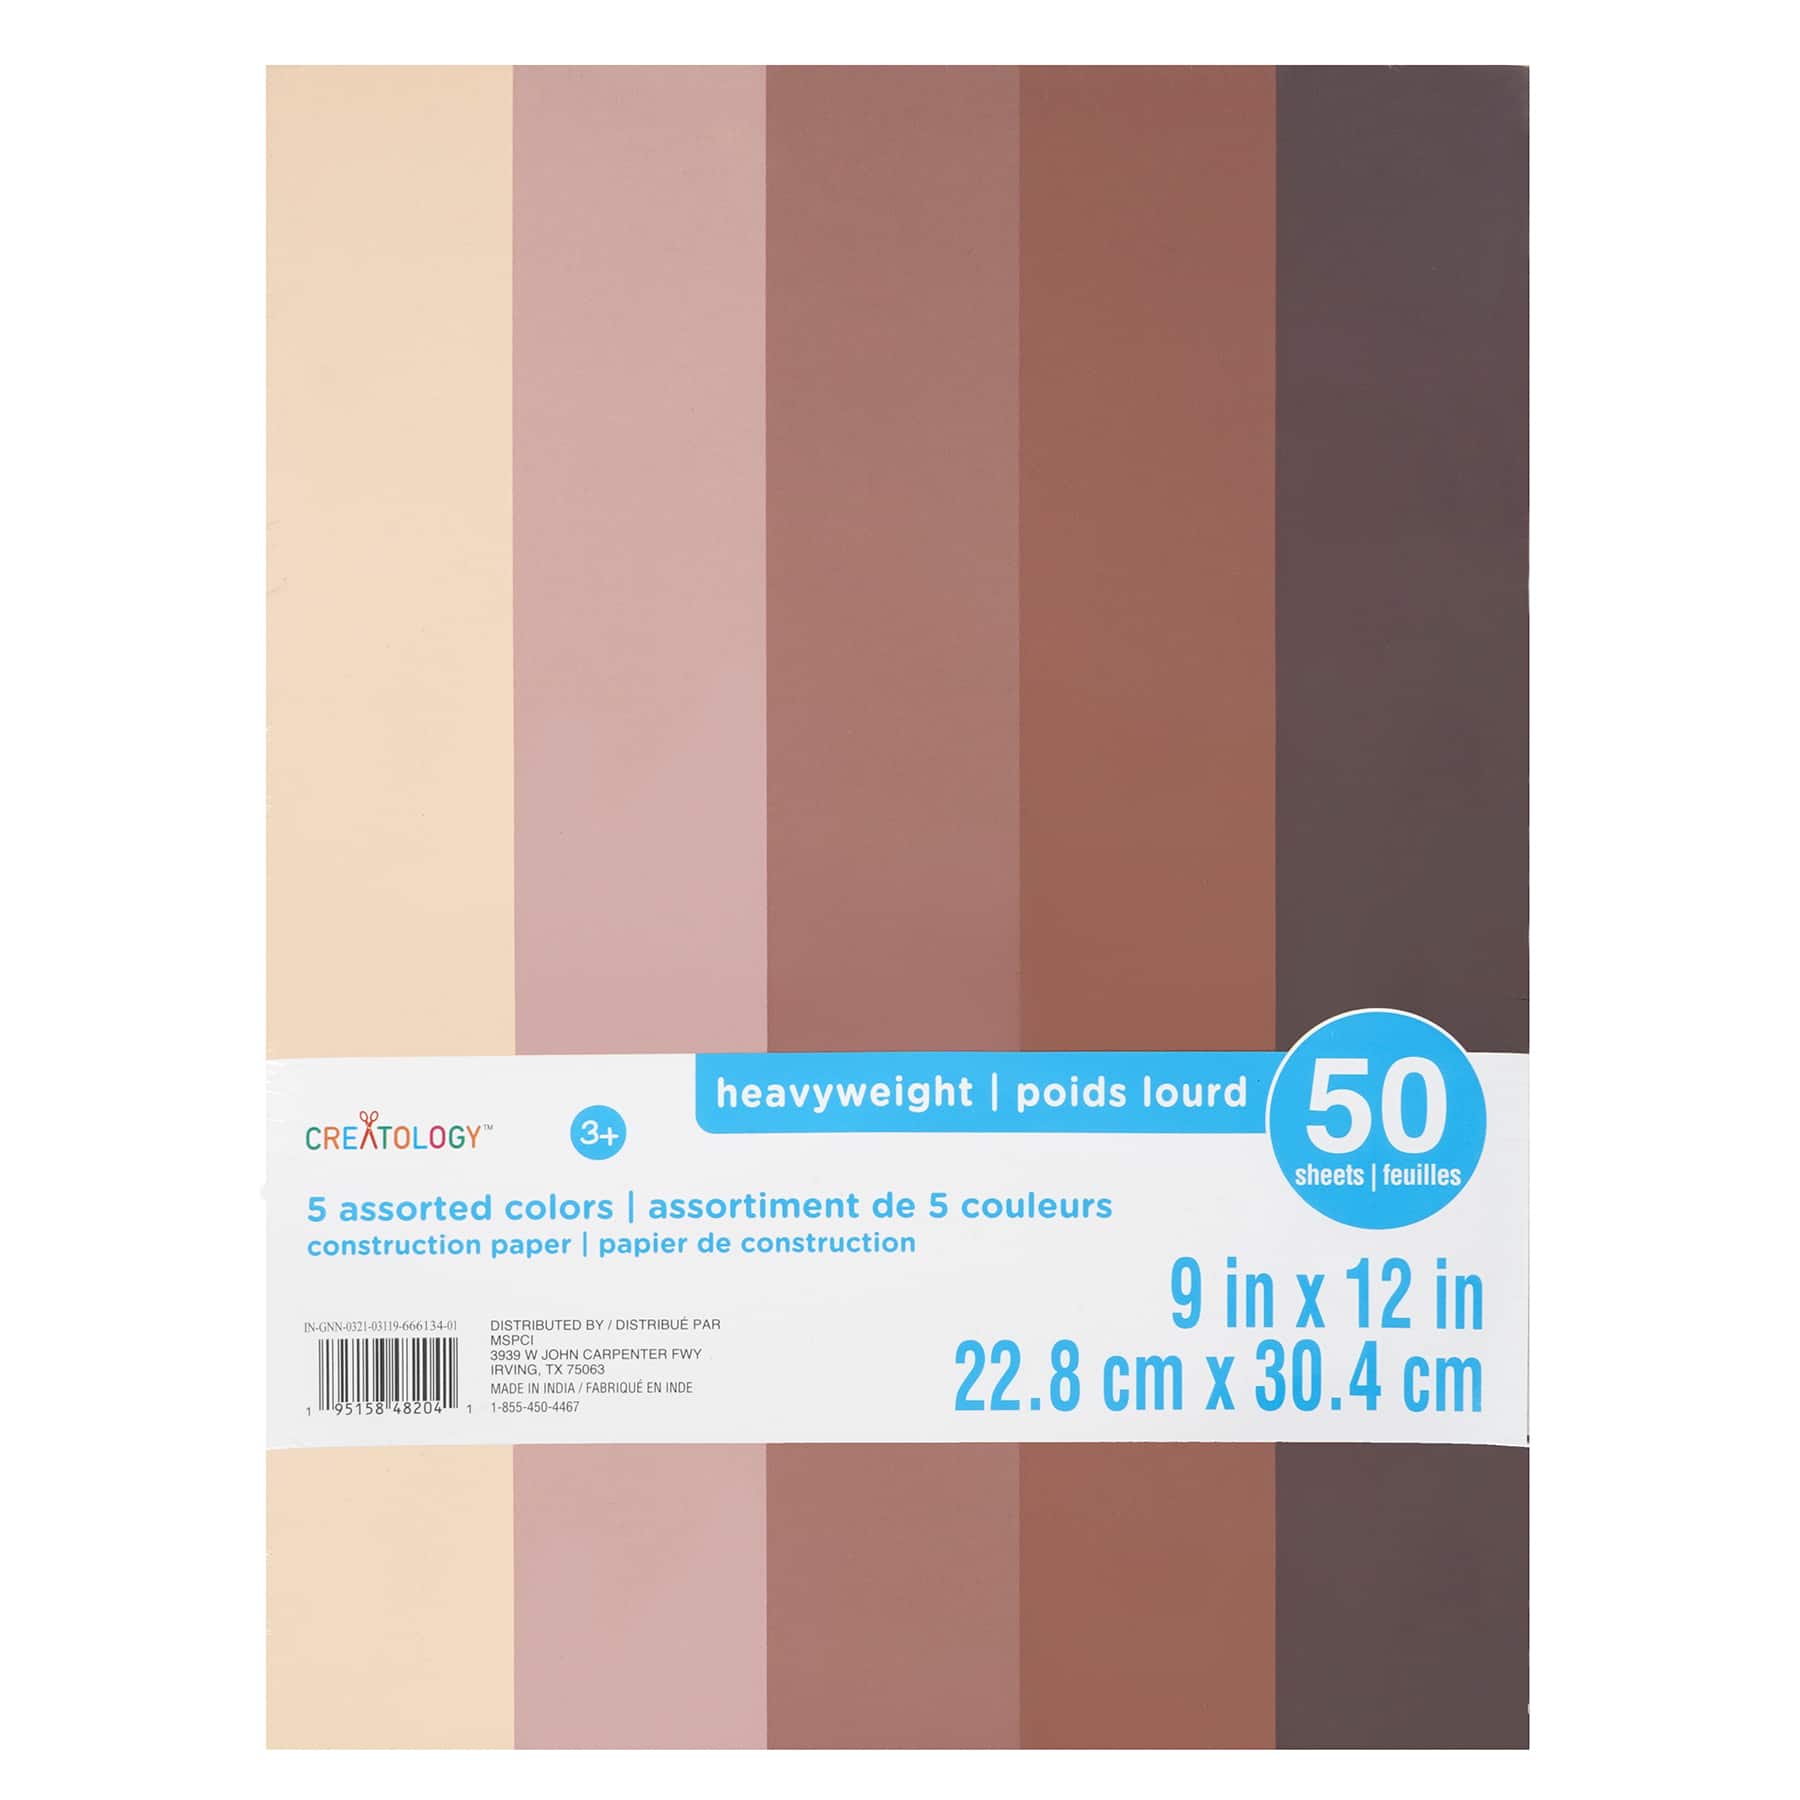 Multicultural 'Skin Tone' Construction Paper - Educational Colours (AS3669)  Educational Resources and Supplies - Teacher Superstore